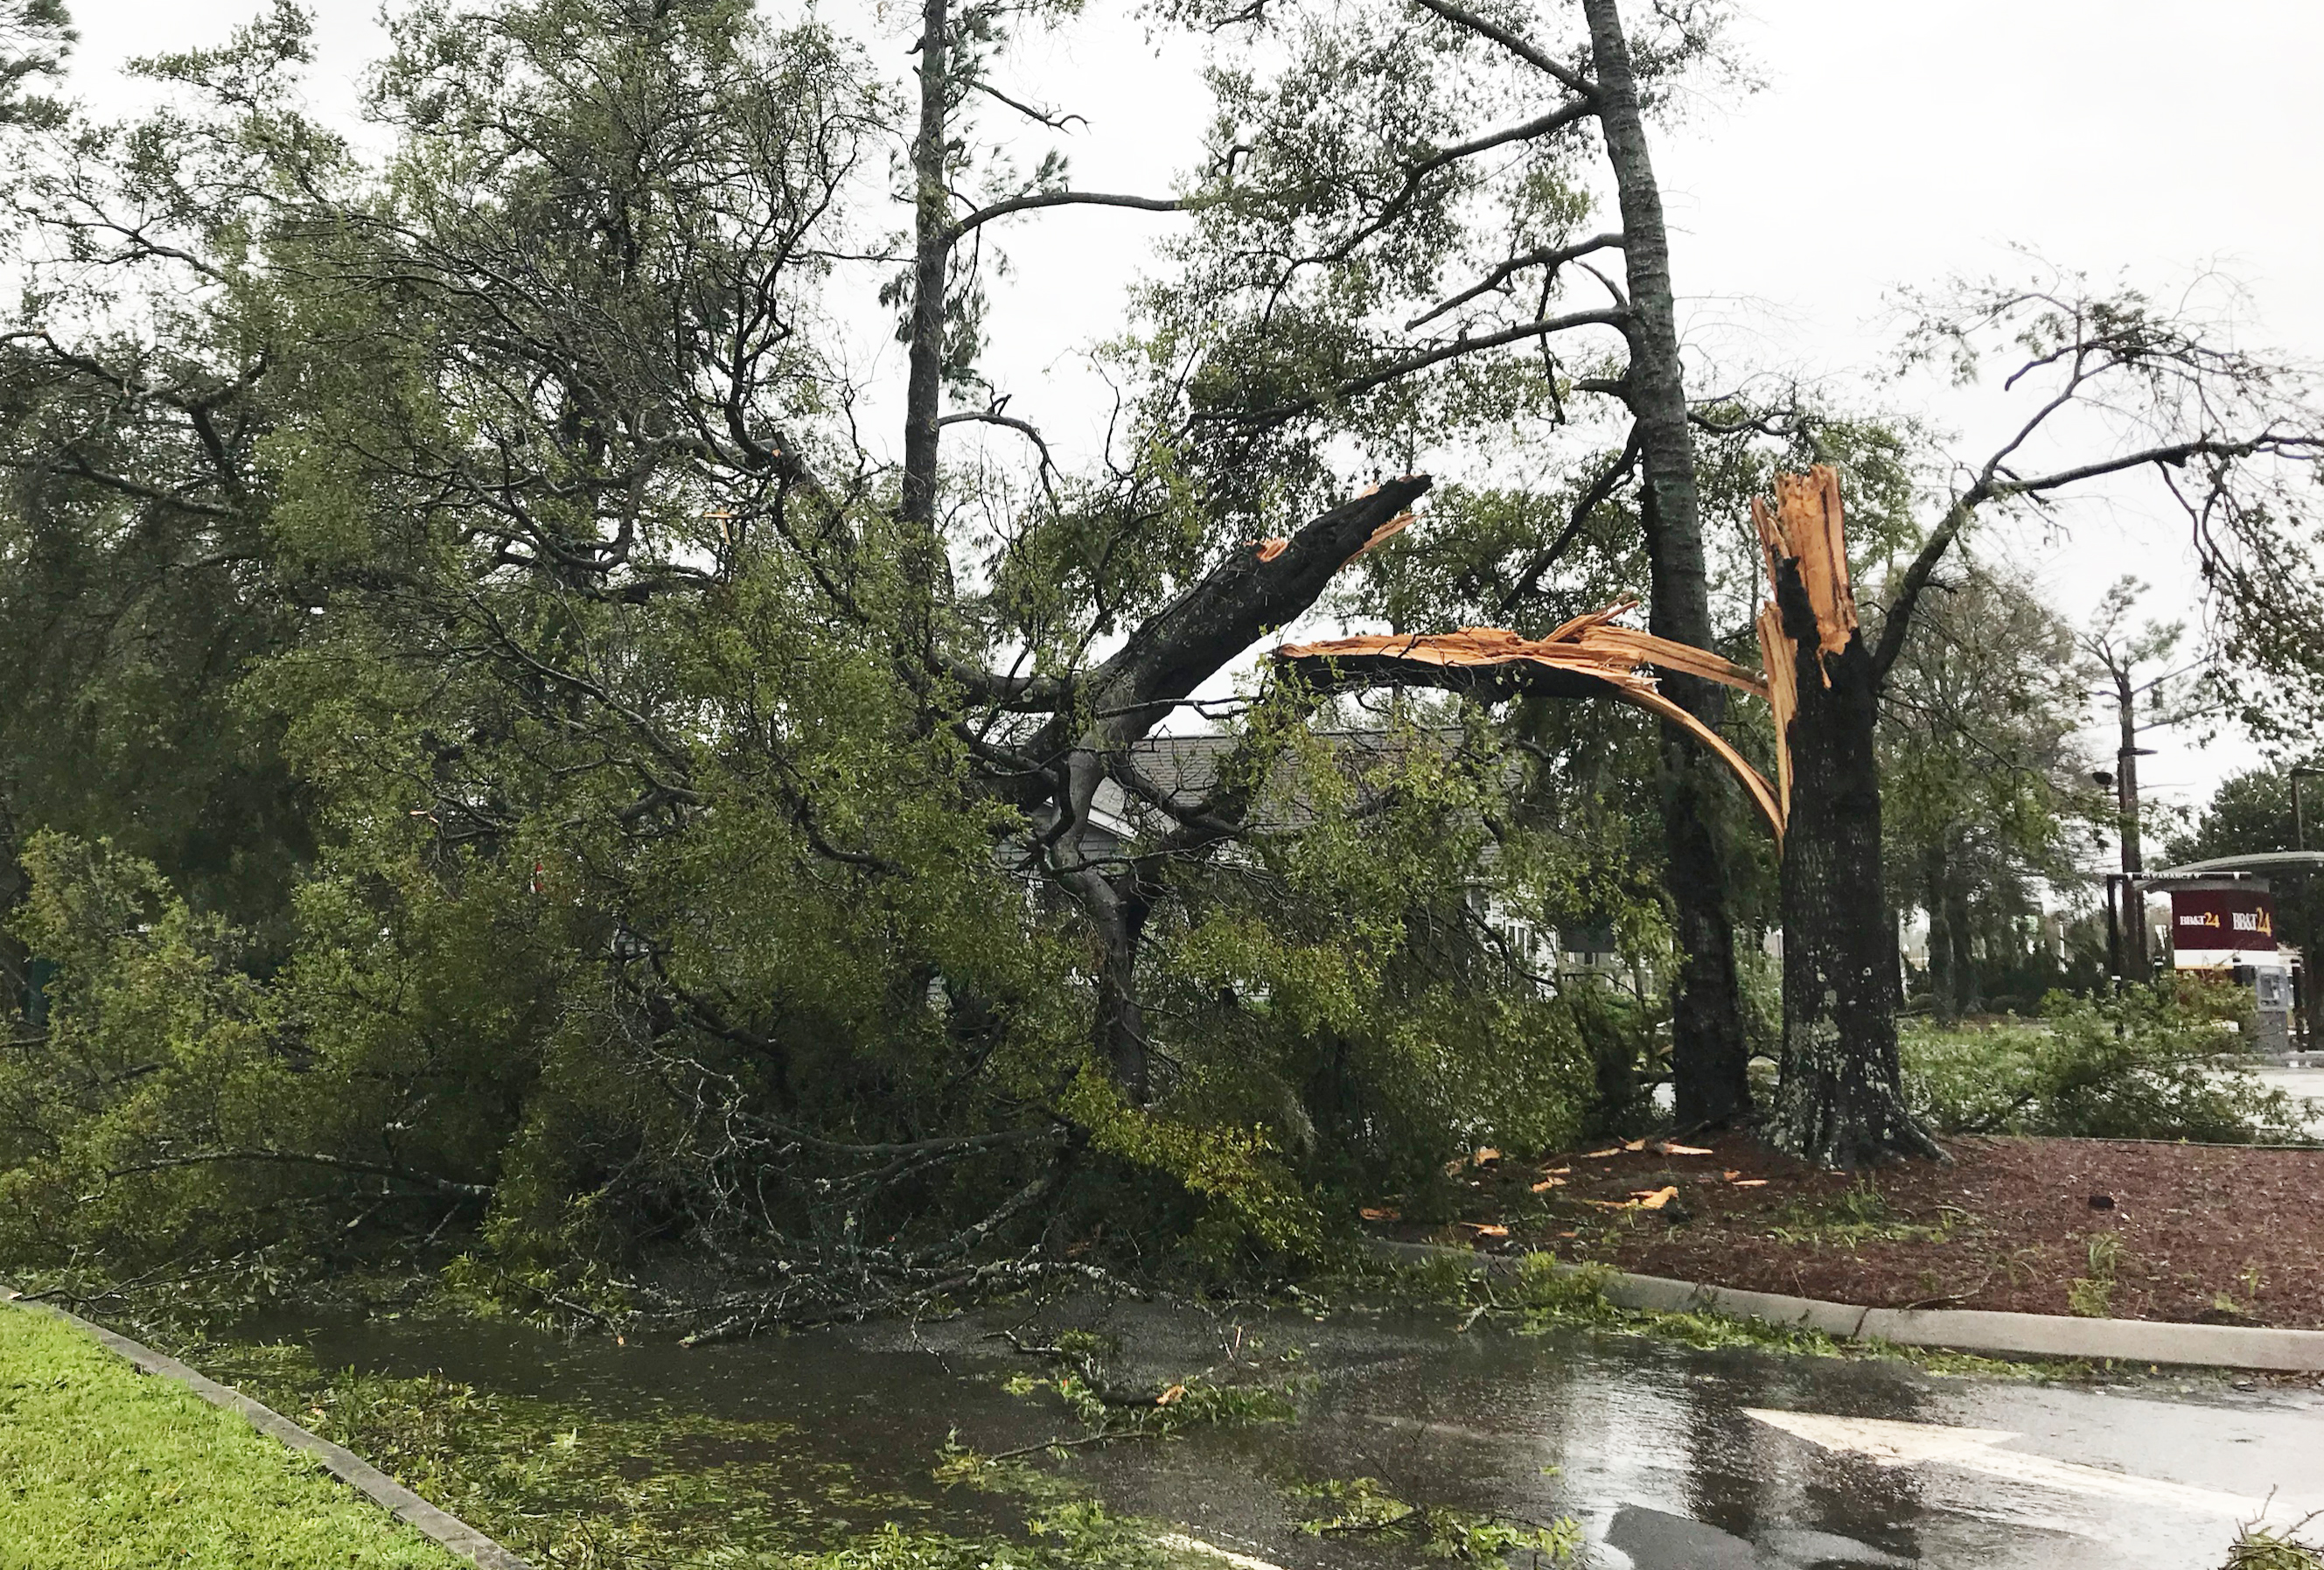 a large tree cracked, split and broken after storm in North Carolina - Hurricane Florence